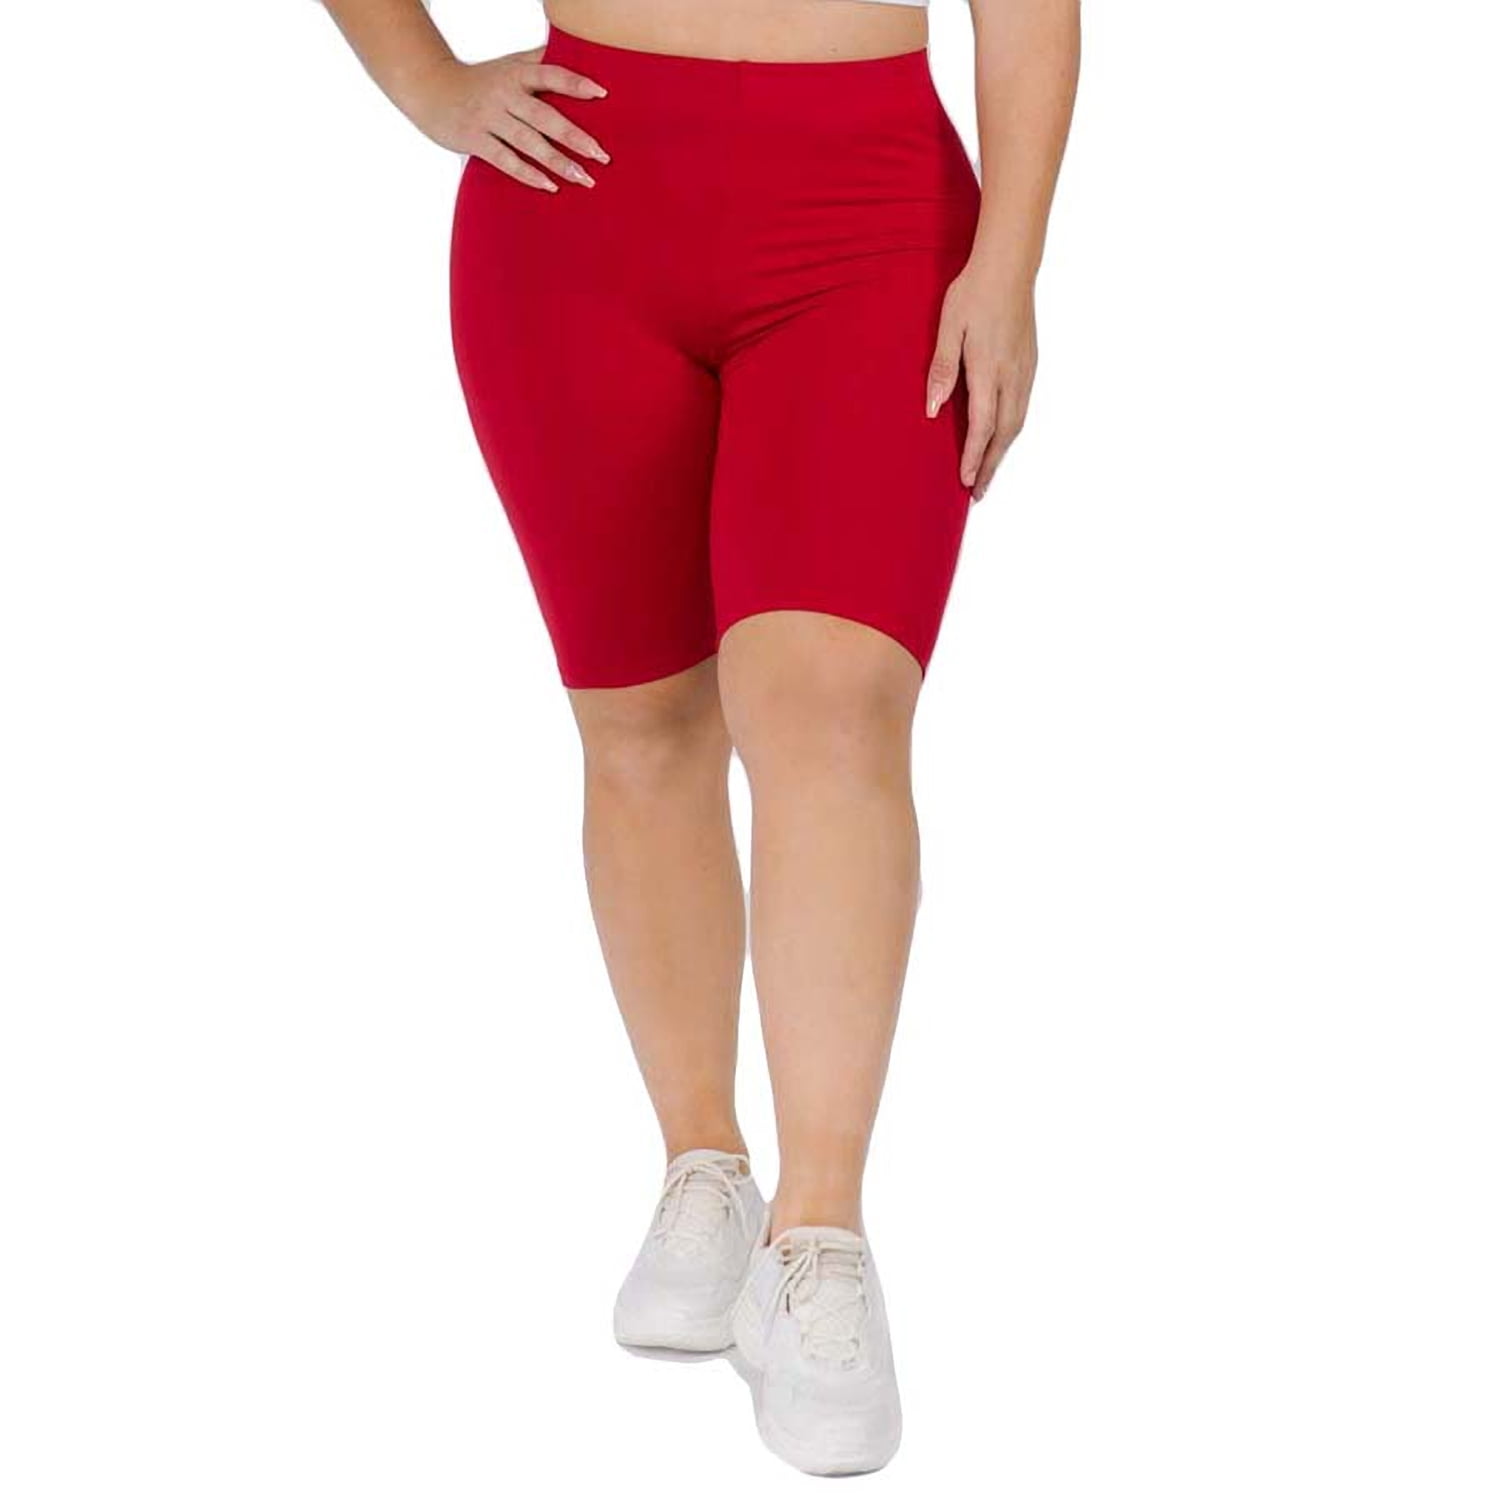 Women's Plus Size Peach Skin Biker Shorts. (6 Pack) • Peach Skin • Short  leg design • Comfortable and easy pull-up style • Solid color, Very  Stretchy • Fits like a Glove •